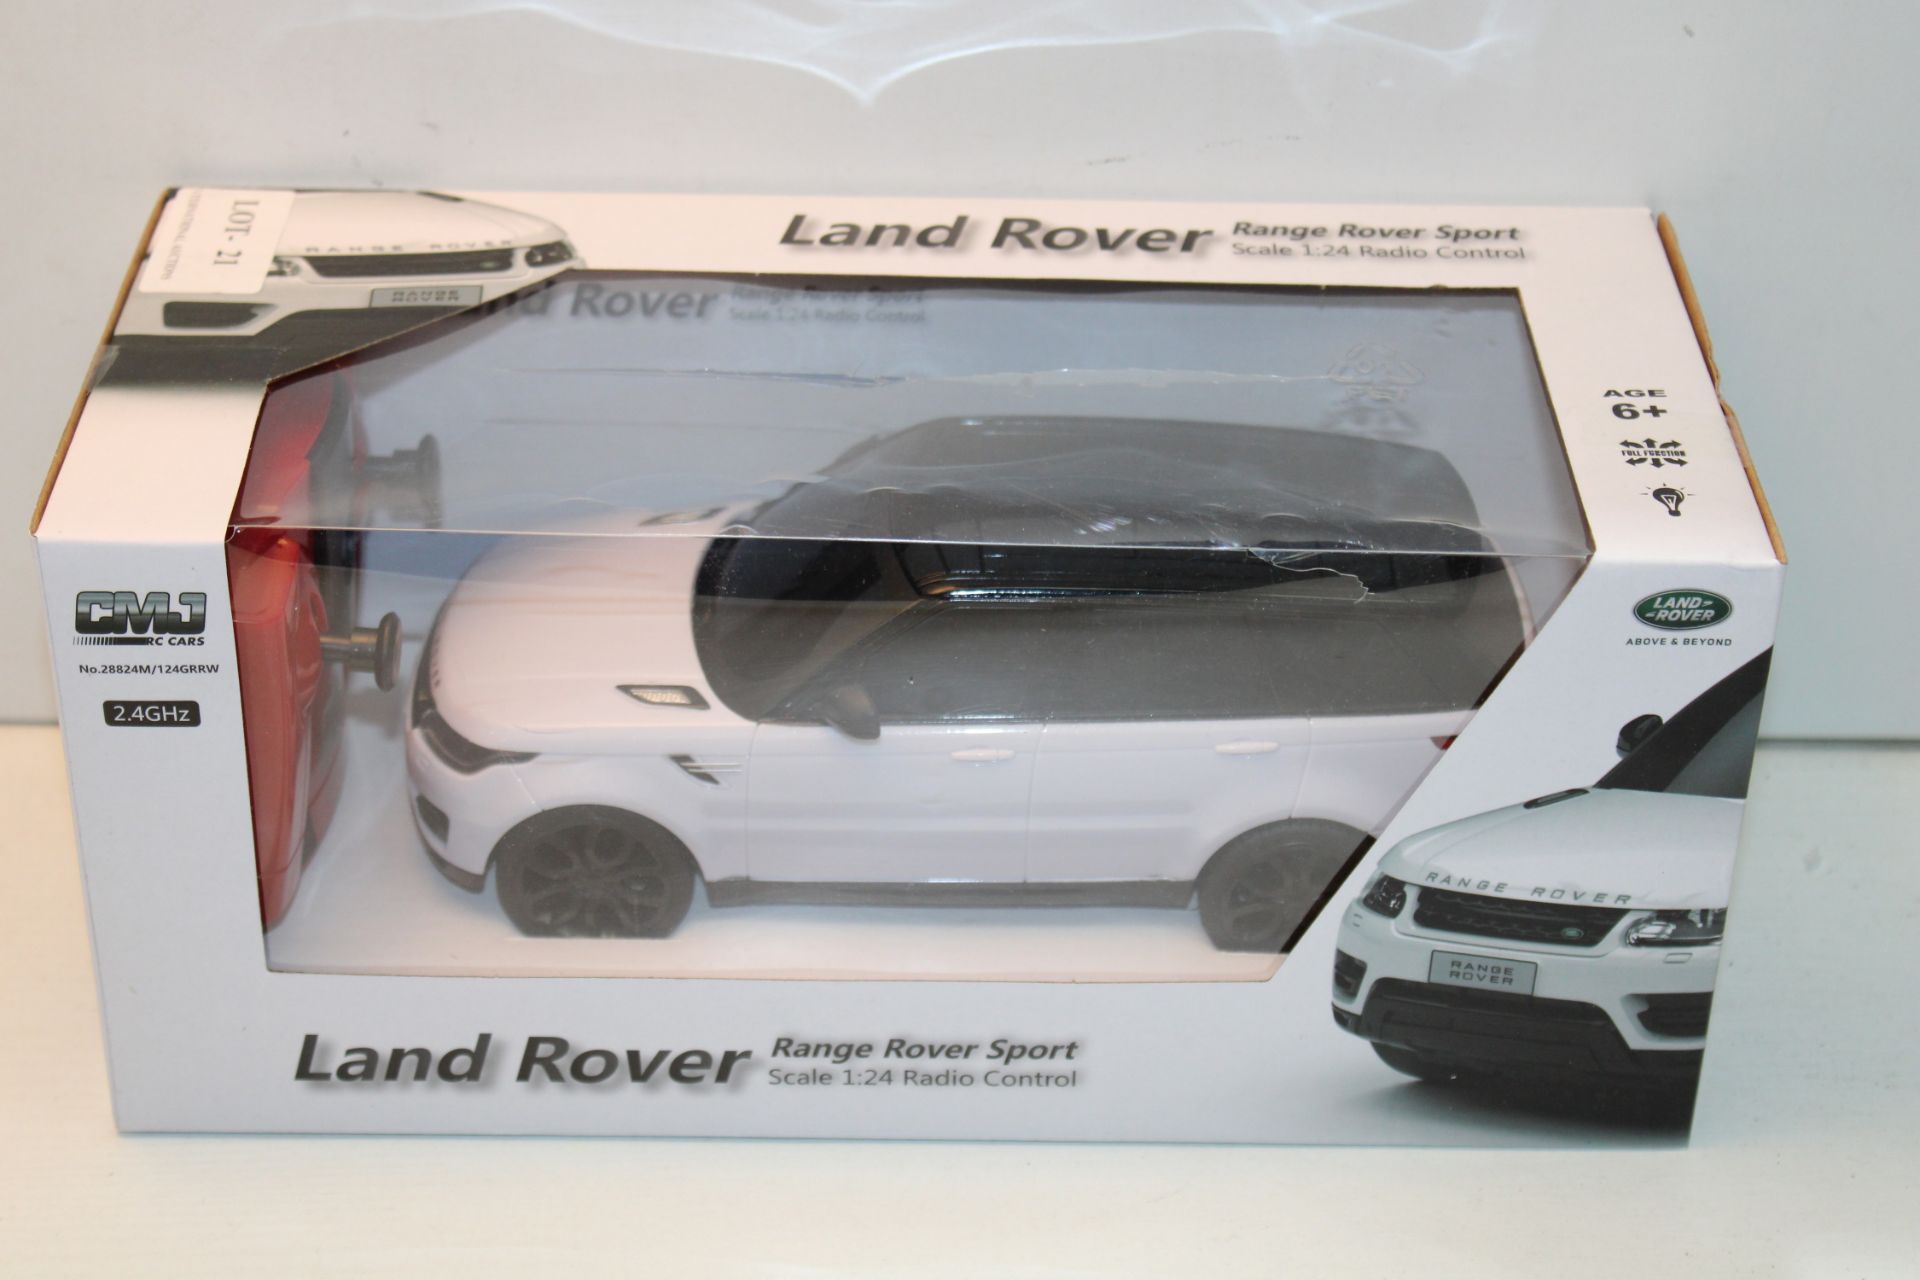 BOXED LAND ROVER RANGE ROVER SPORT SCALE 1:24 RADIO CONTROL Condition ReportAppraisal Available on